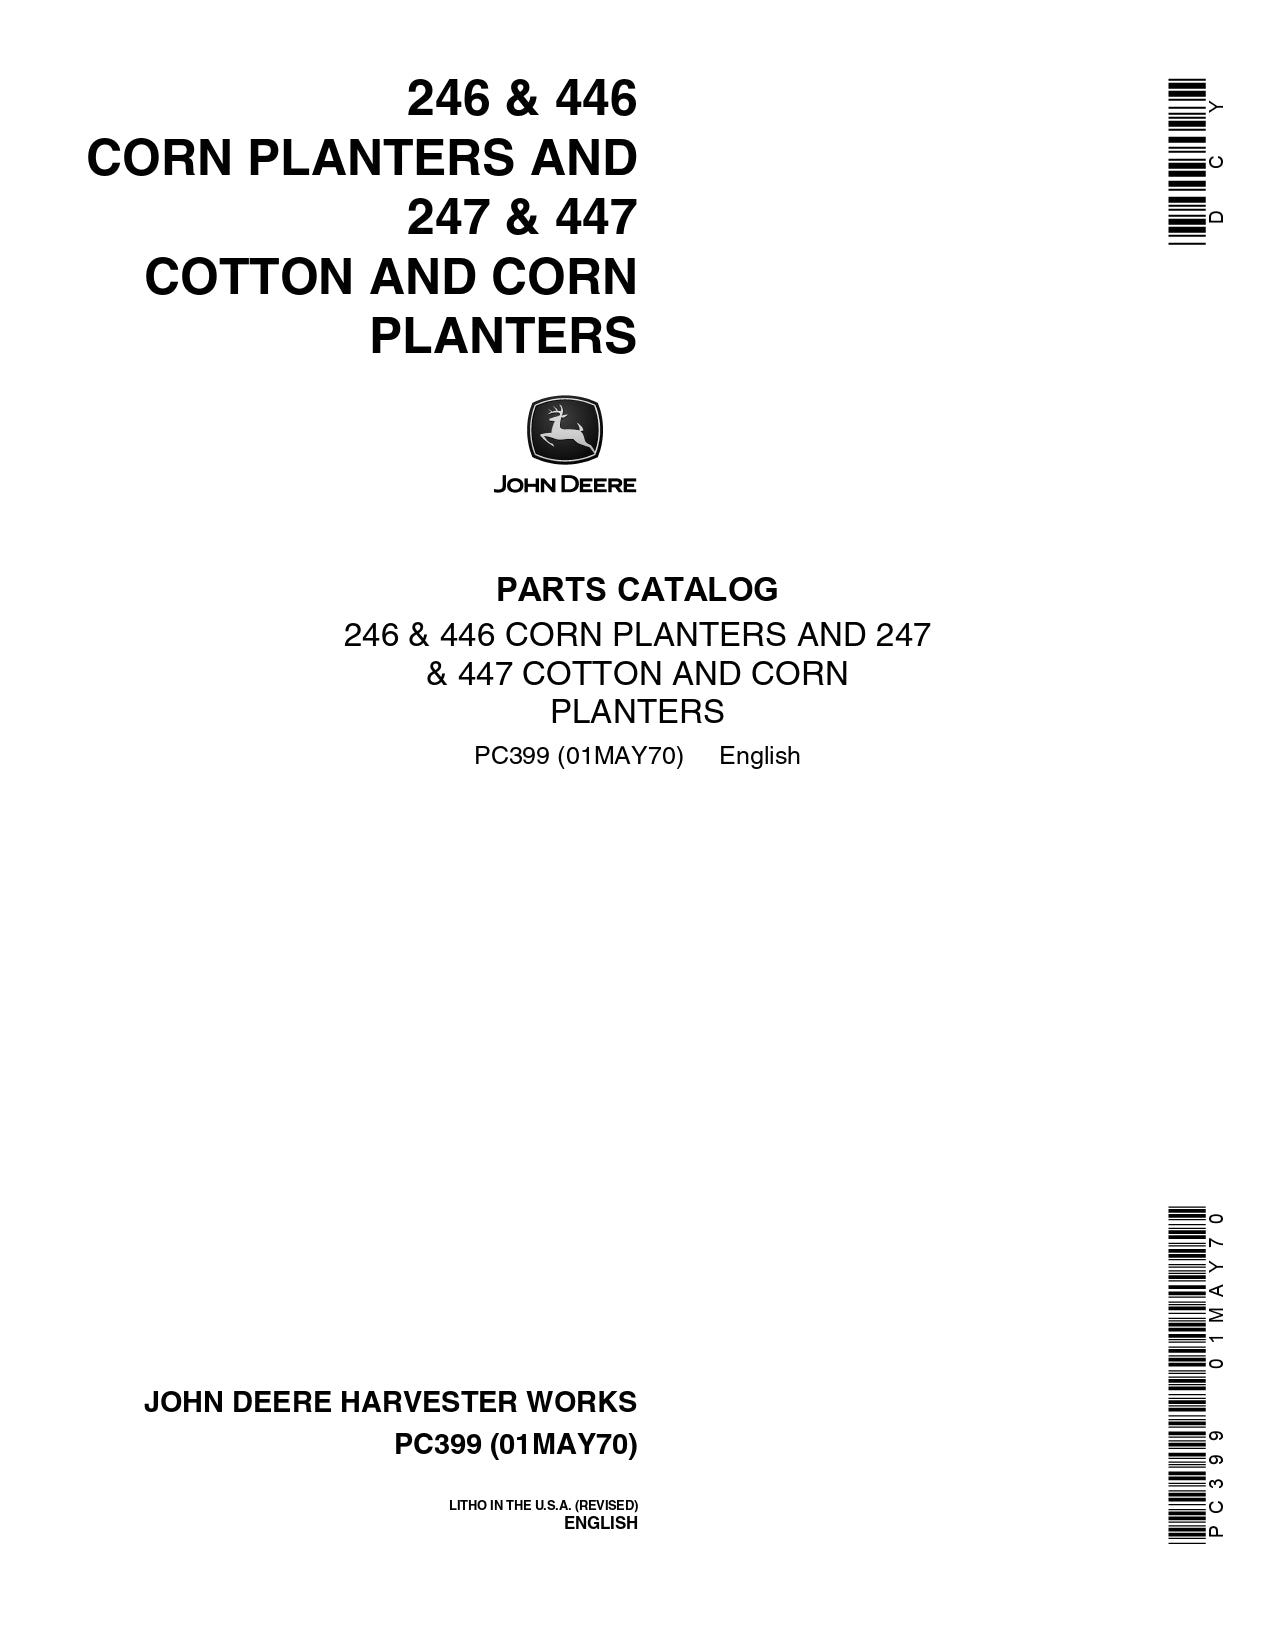 JOHN DEERE 246 & 446 CORN PLANTER AND 247 & 447 COTTON AND CORN PLANTER PARTS MANUAL PC399 INSTANT DOWNLOAD